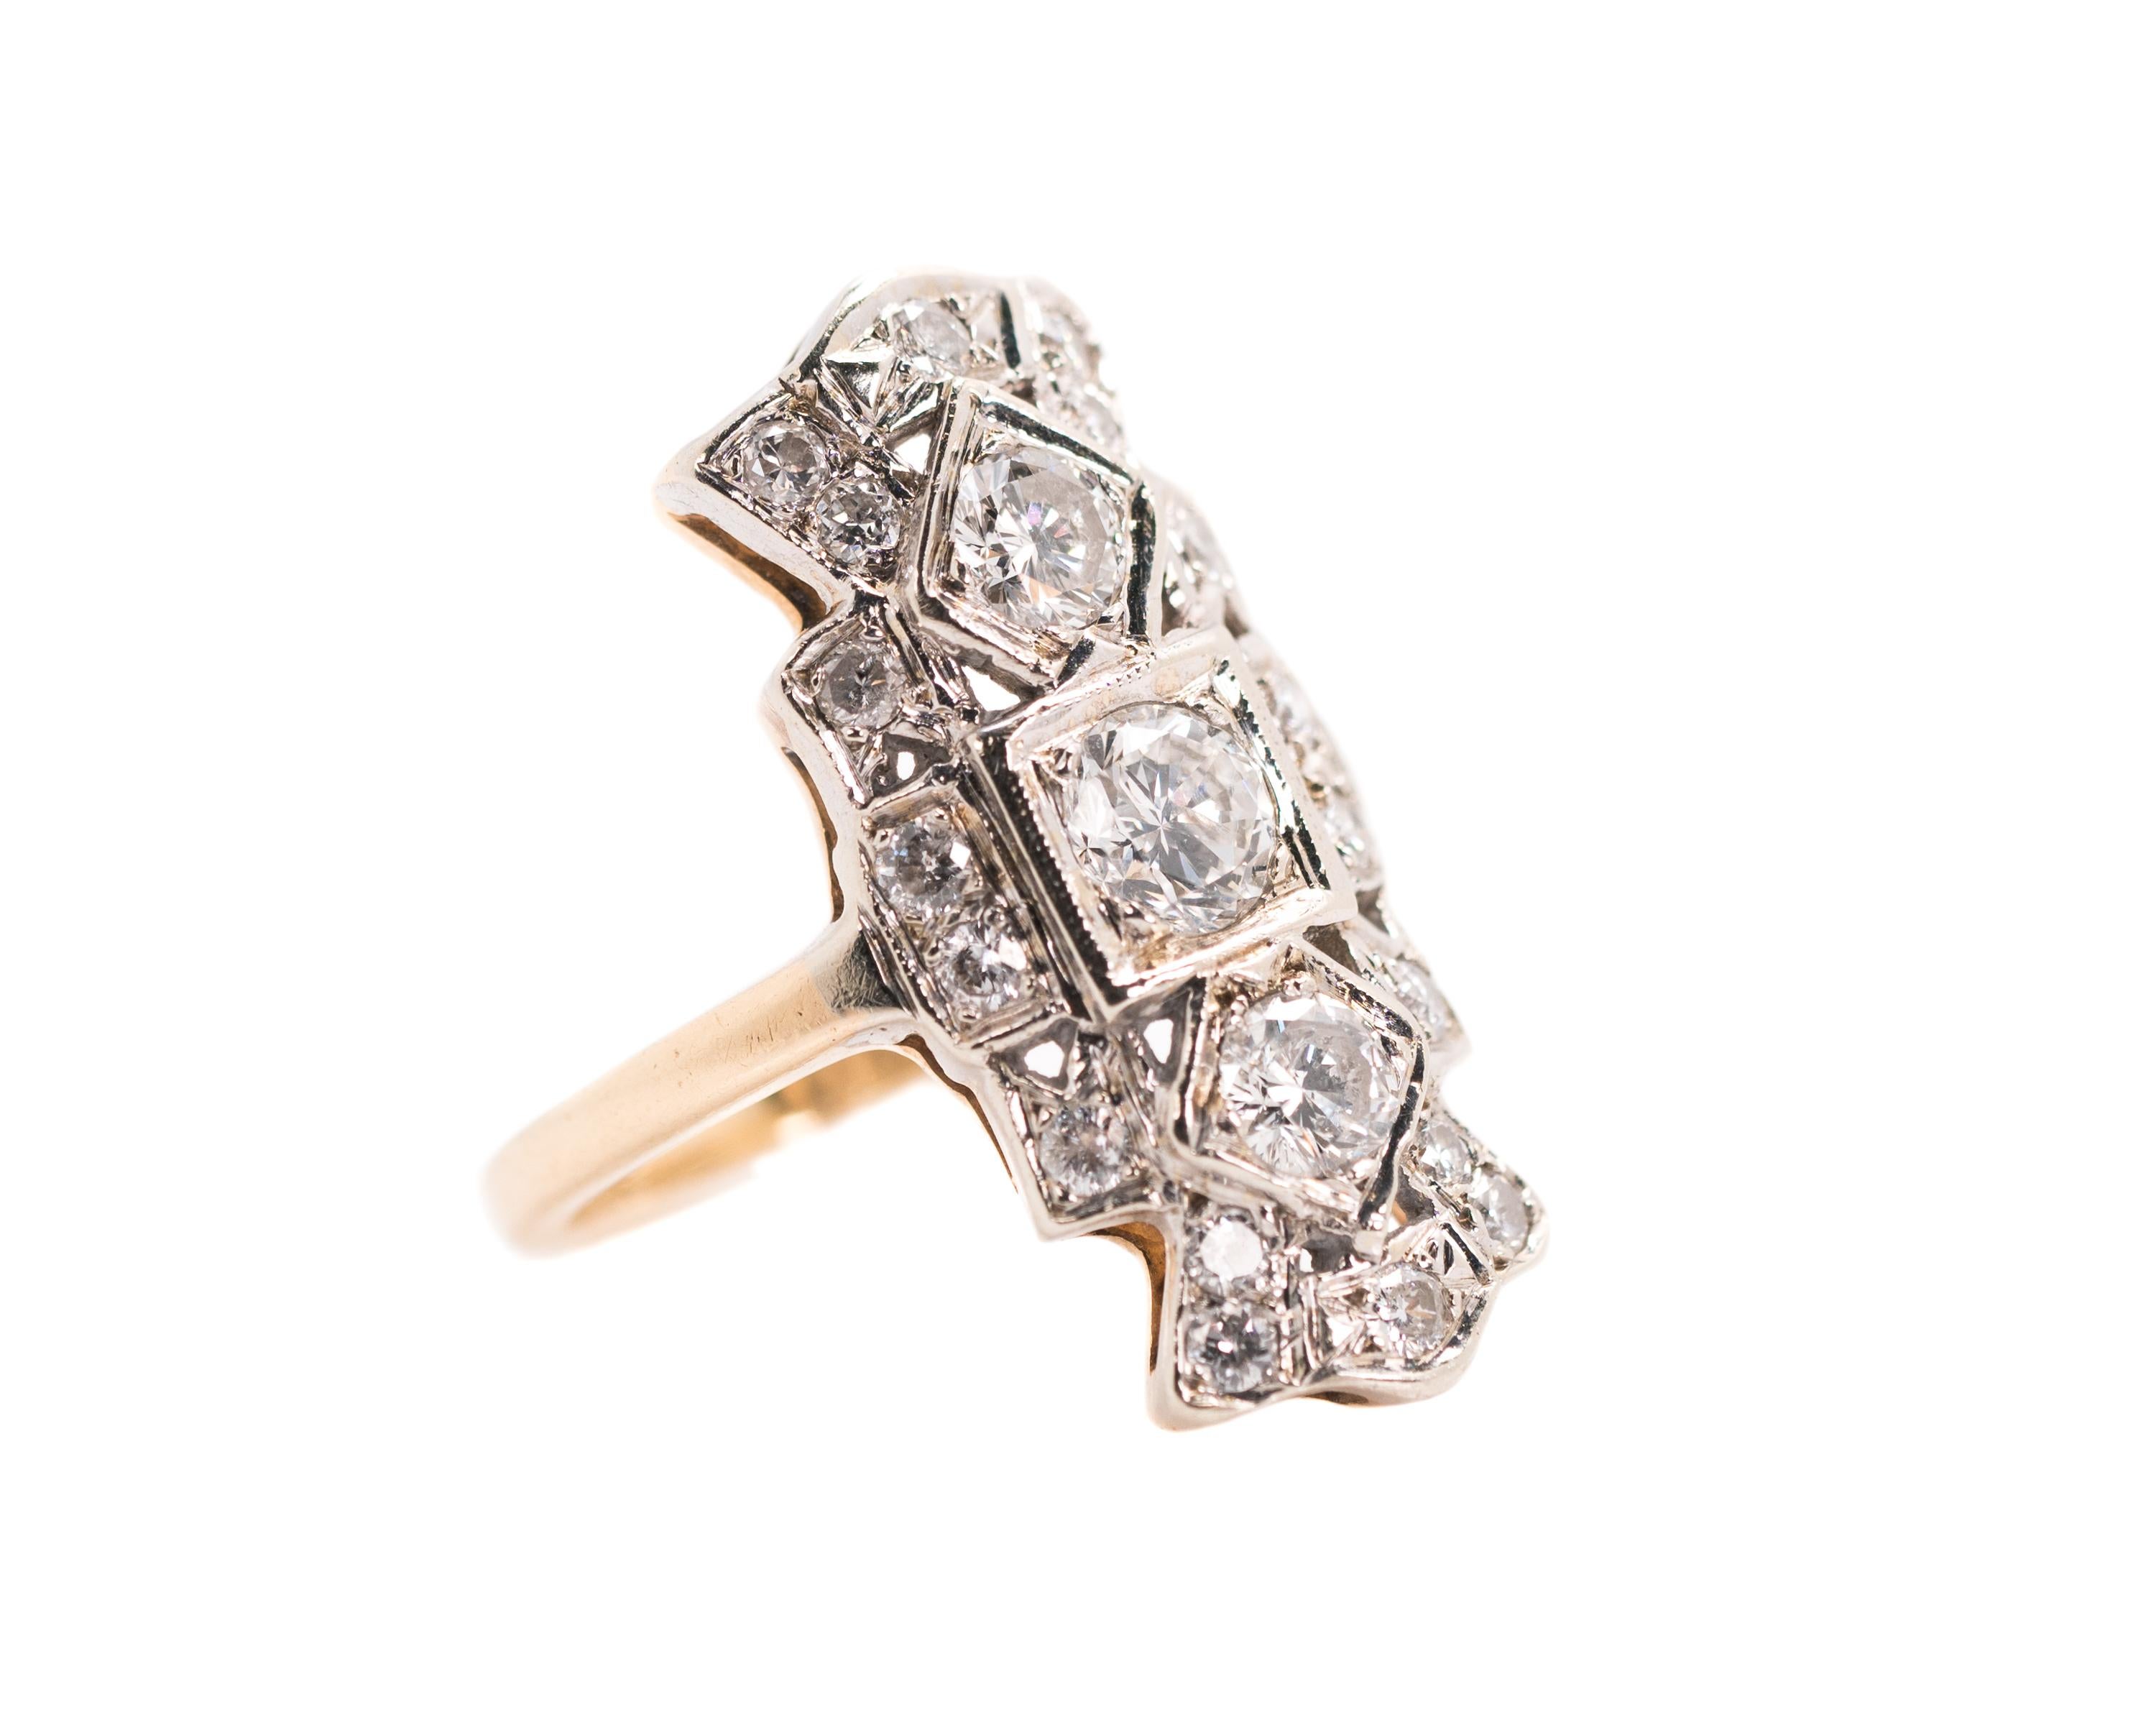 1930s Art Deco Old European, Single cut Diamond Shield Ring - 14 Karat Yellow Gold, White Gold, Diamonds

Features 3 large round Old European cut Diamonds surrounded by single cut Diamonds. 
The head of the ring is crafted from 14k White Gold. The